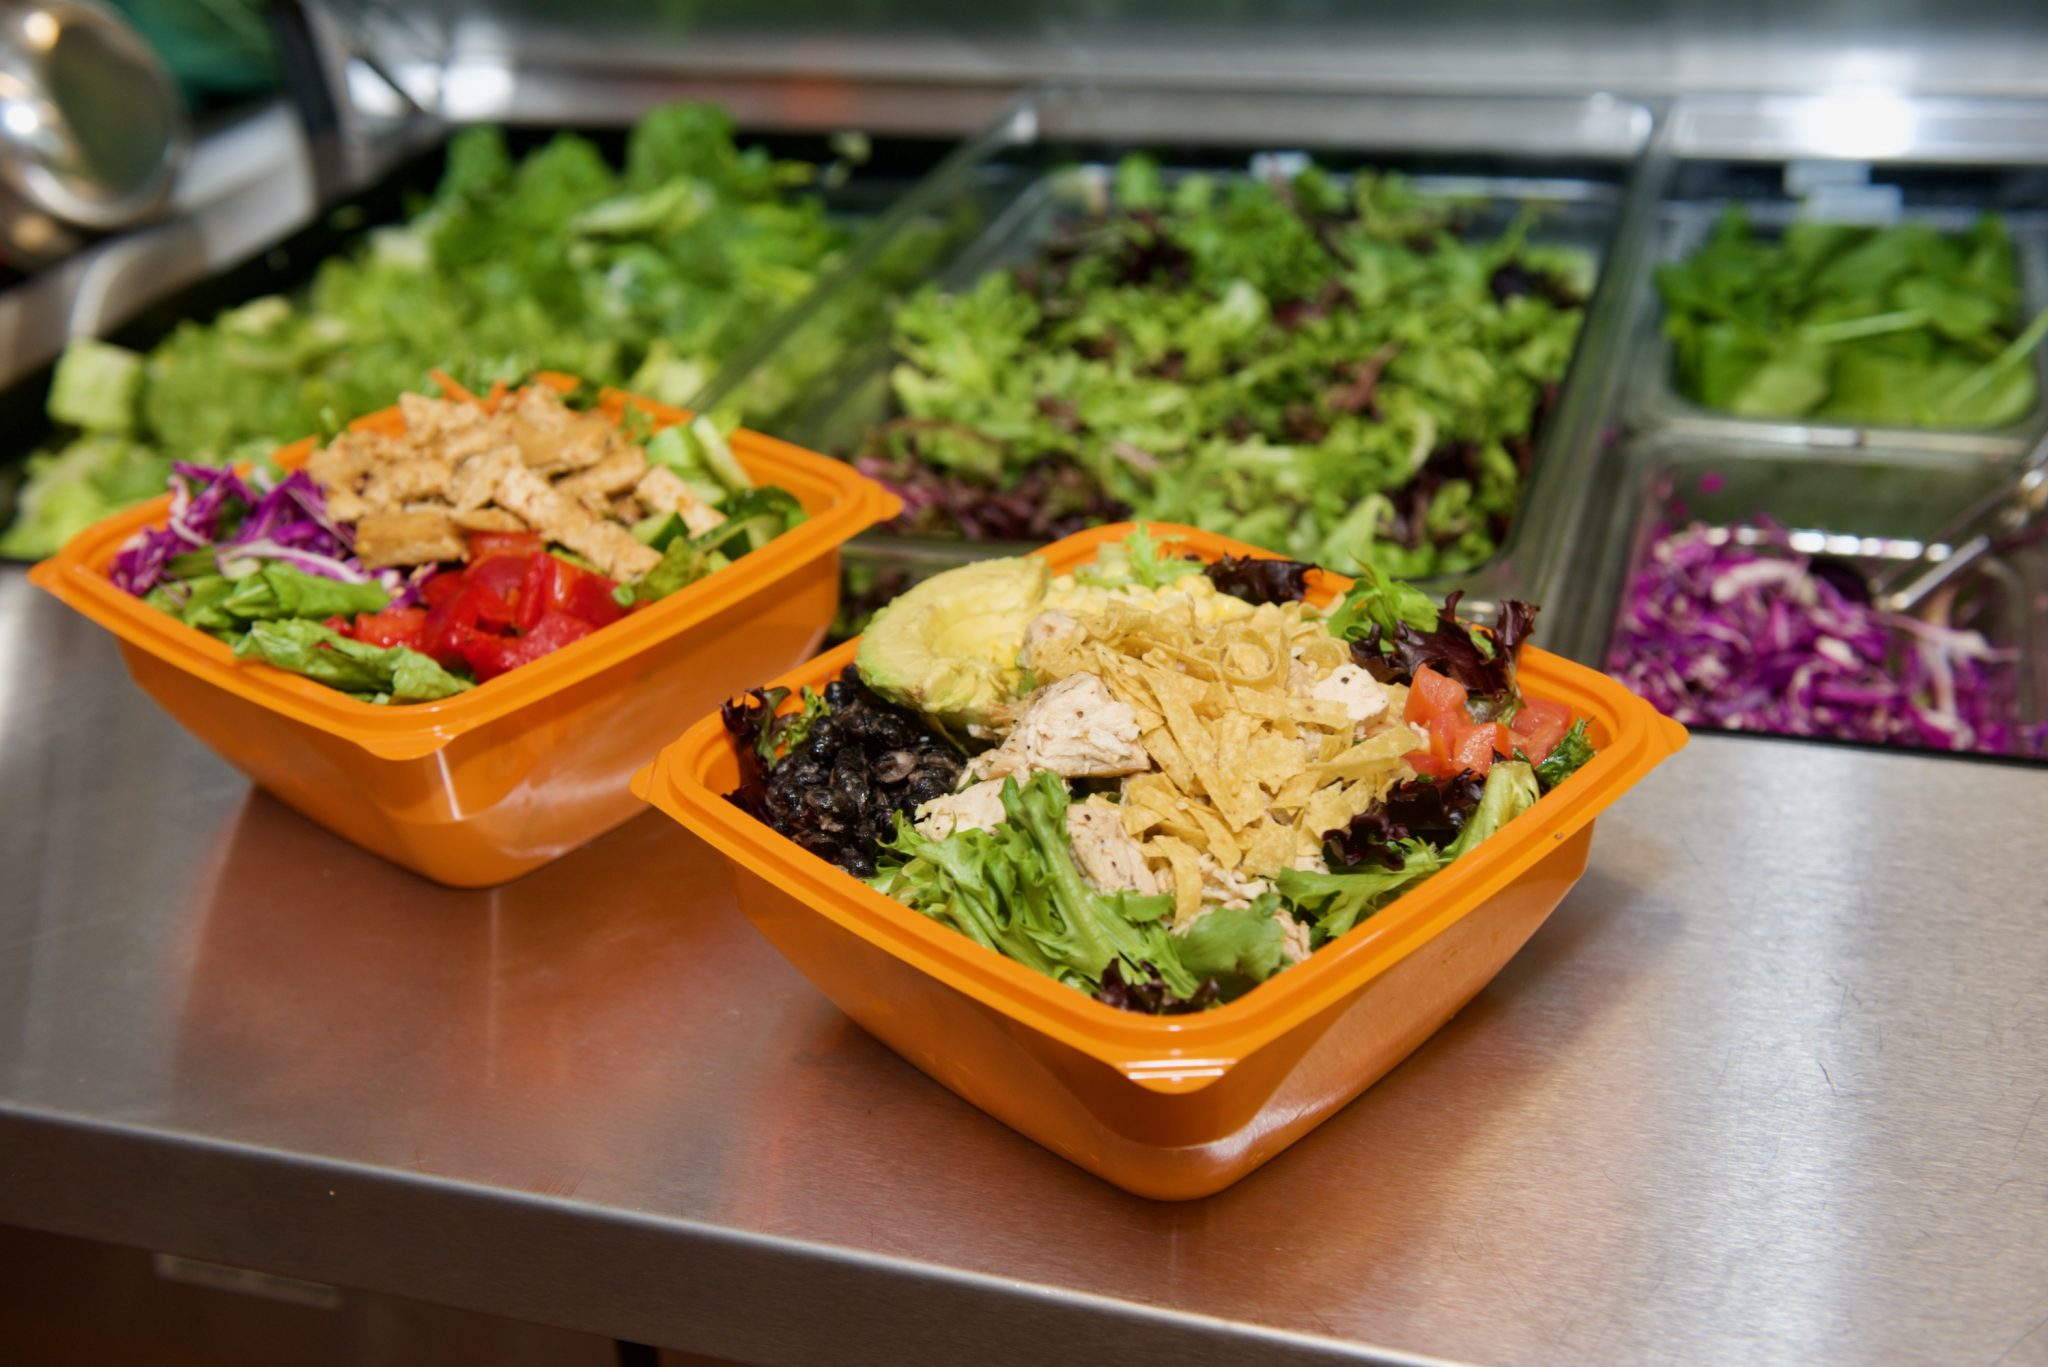 Salad and Go Brings Healthy Food to Plano with DriveThru Speed and